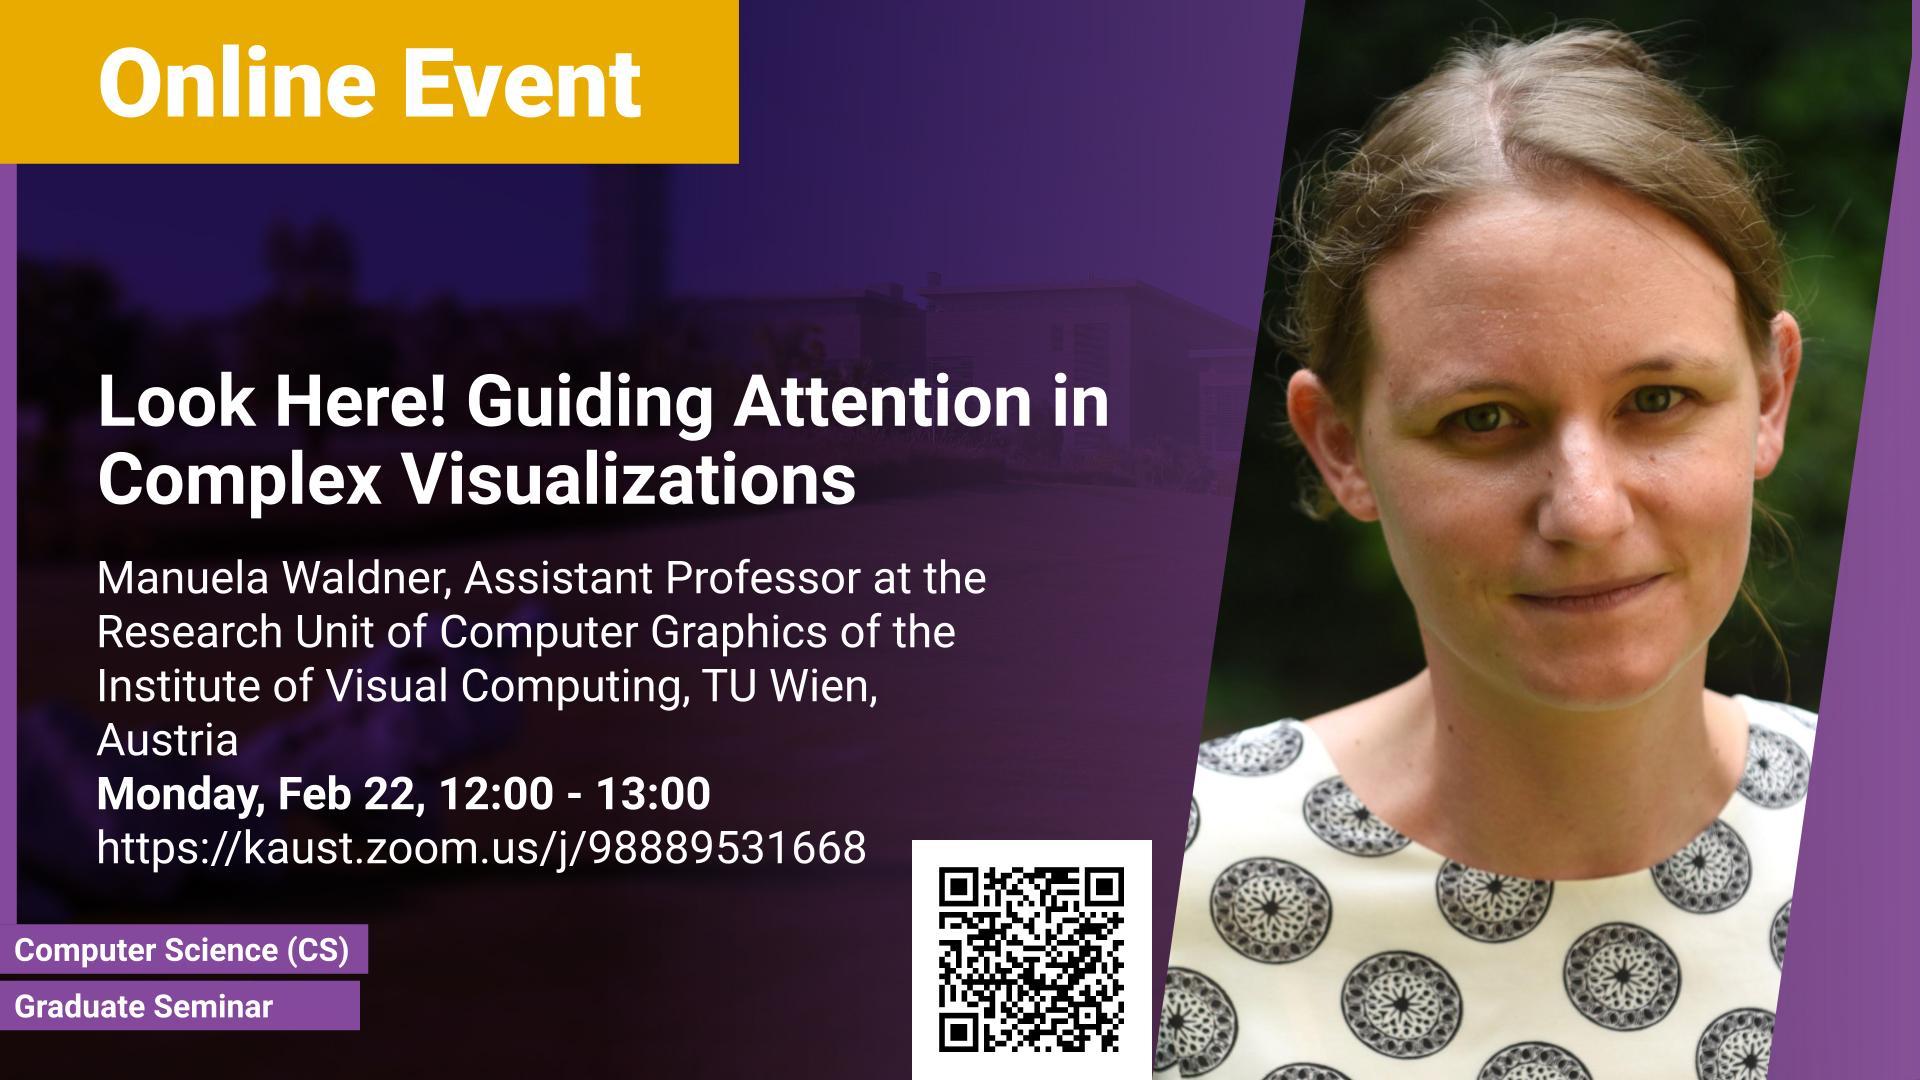 KAUST CEMSE CS Graduate Seminar Manuela Waldner Look Here Guiding Attention in Complex Visualizations